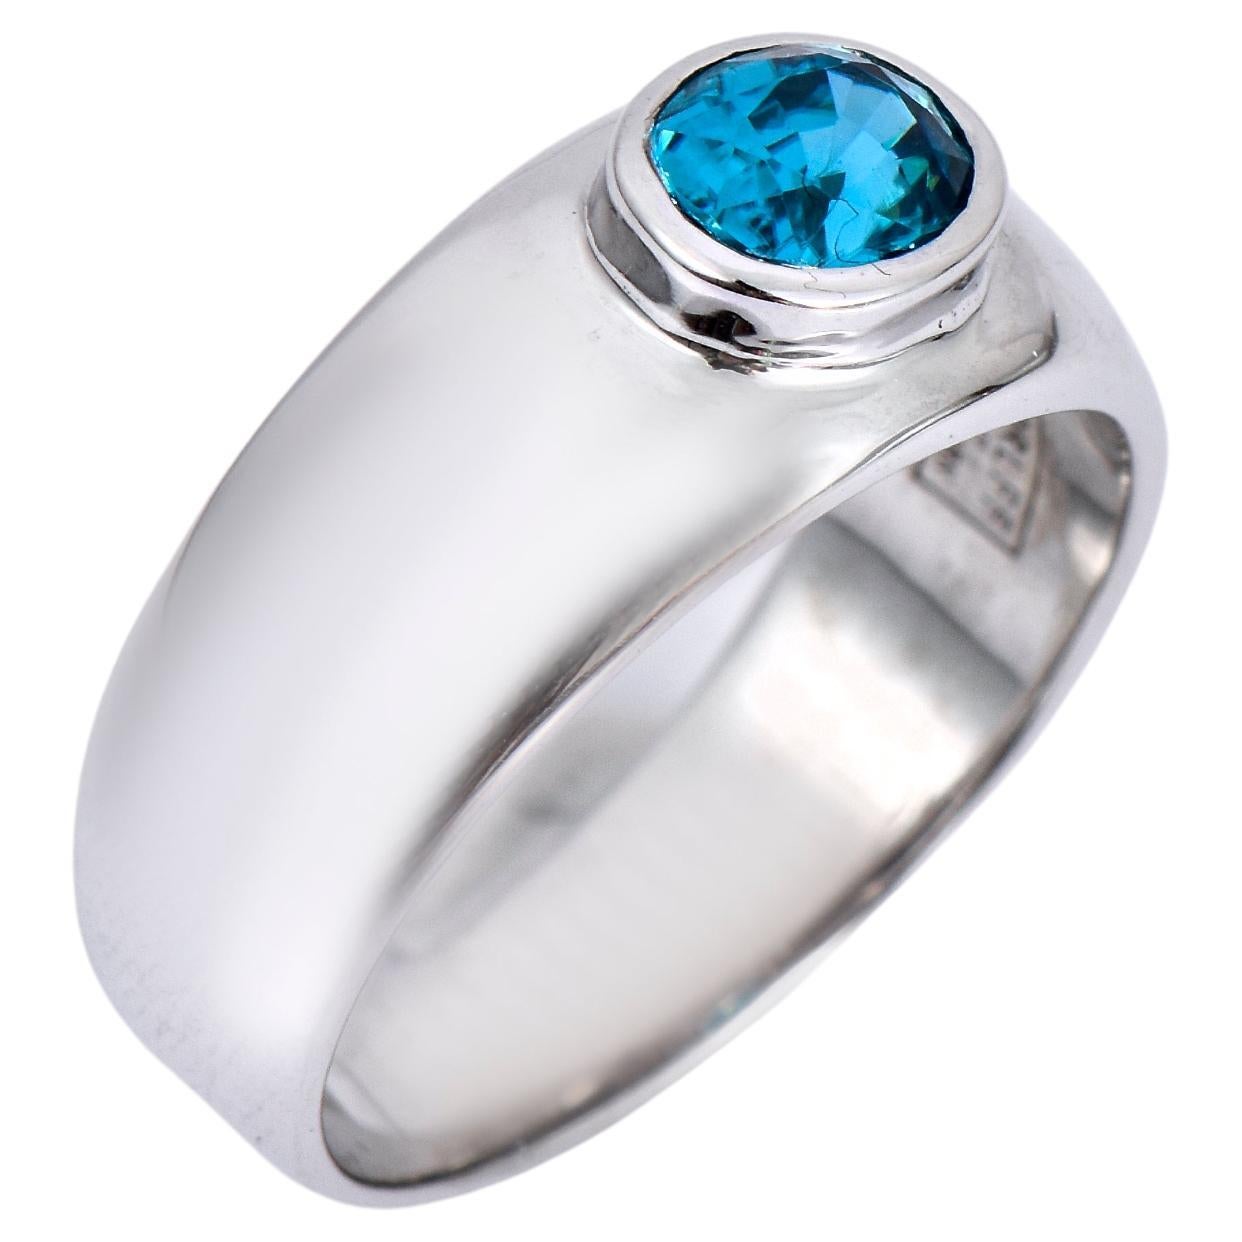 Orloff of Denmark, 1.3 ct Natural Blue Zircon Ring in 925 Sterling Silver For Sale